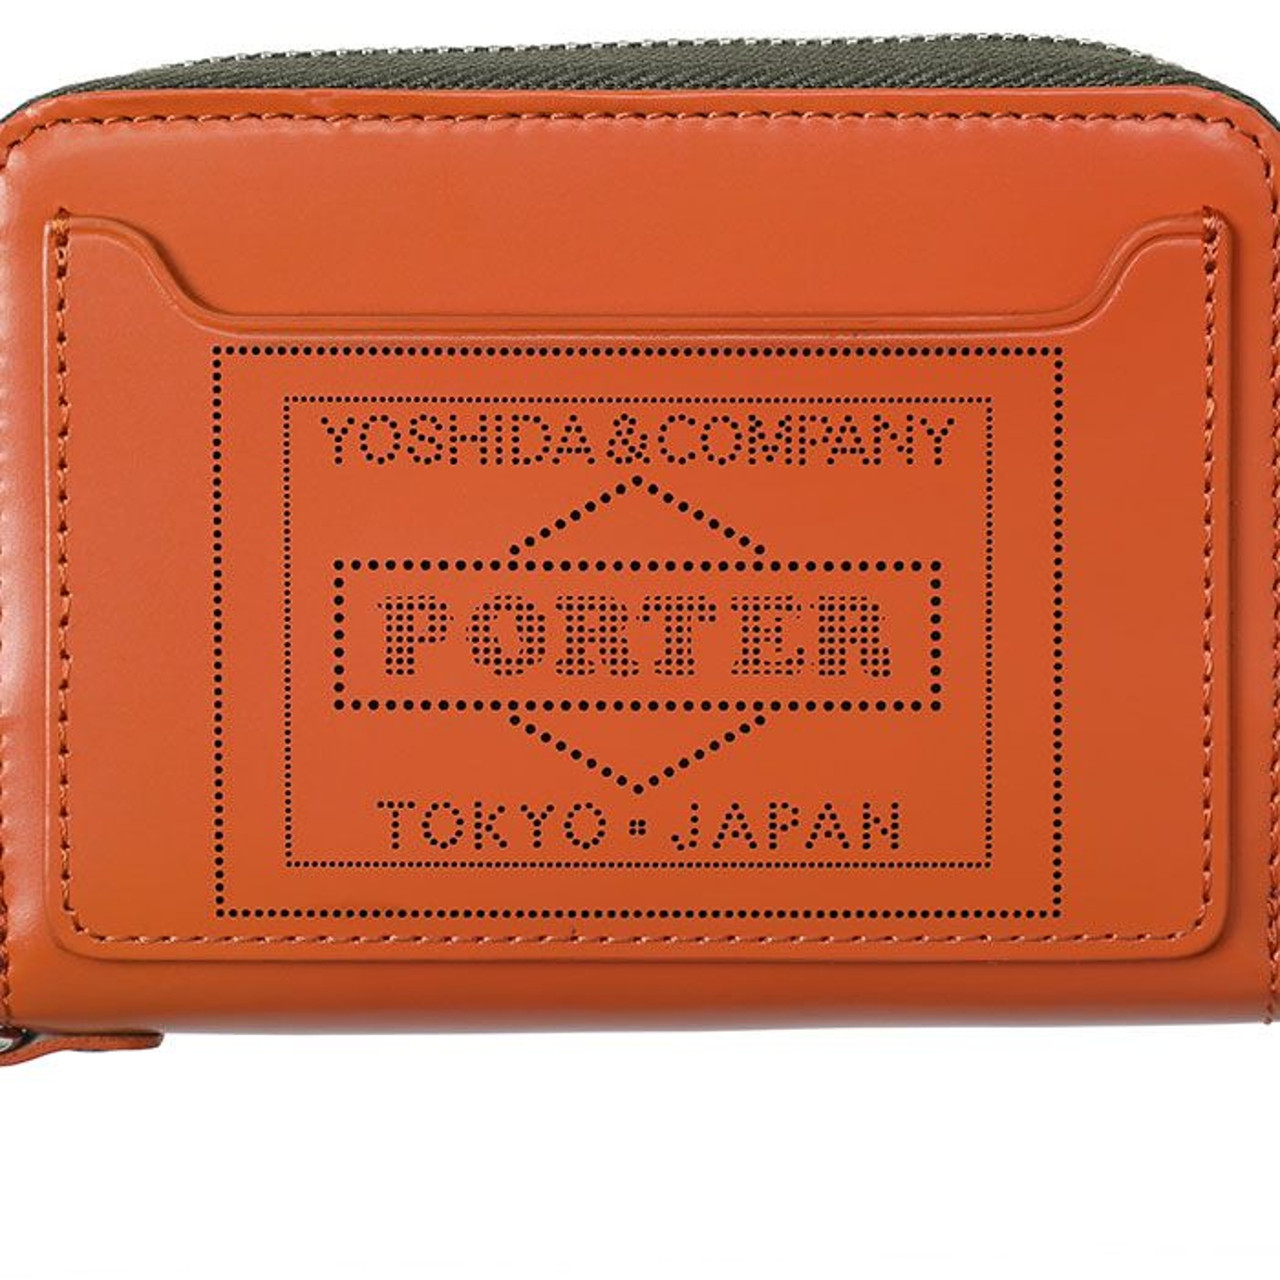 PS LEATHER WALLET GLASS LEATHER Ver. 384-02996